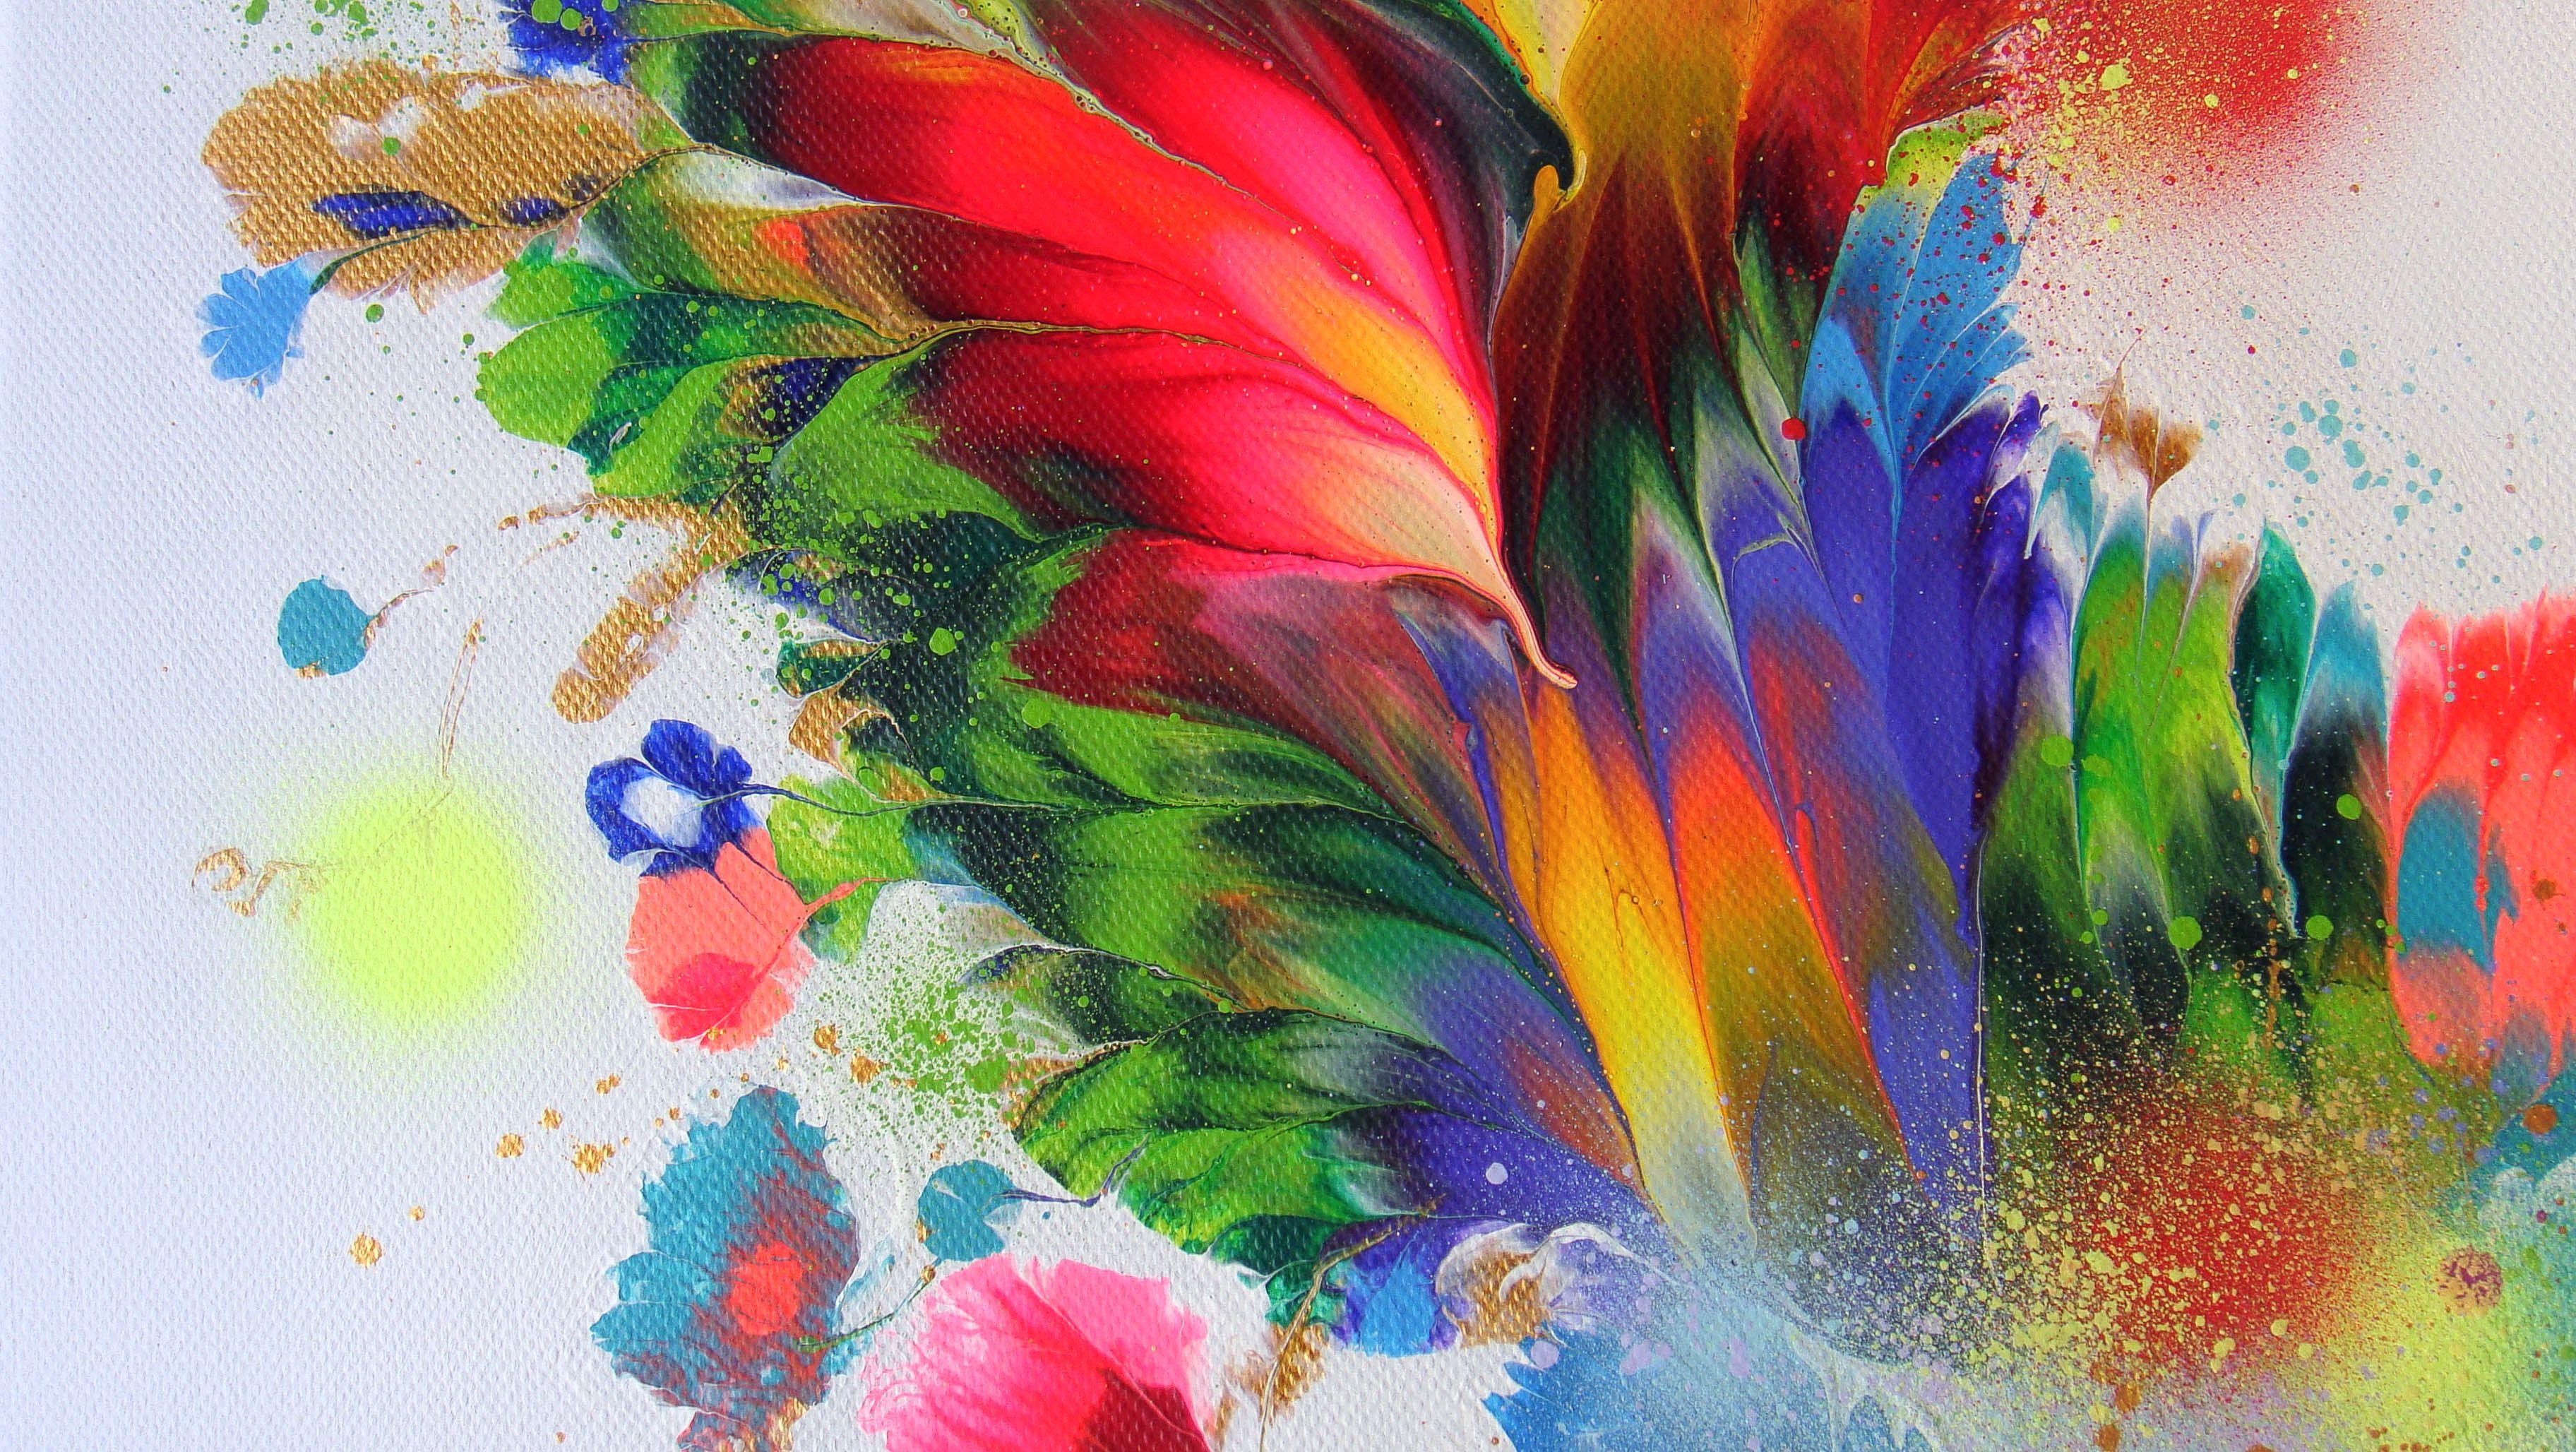 Floral Abstract painting on canvas  Vibrant, colourful and expressive original painting,  Inspired by the beauty of nature, flowers and bright colors. This painting is made in rainbow colors on a white background.   *********   This high quality